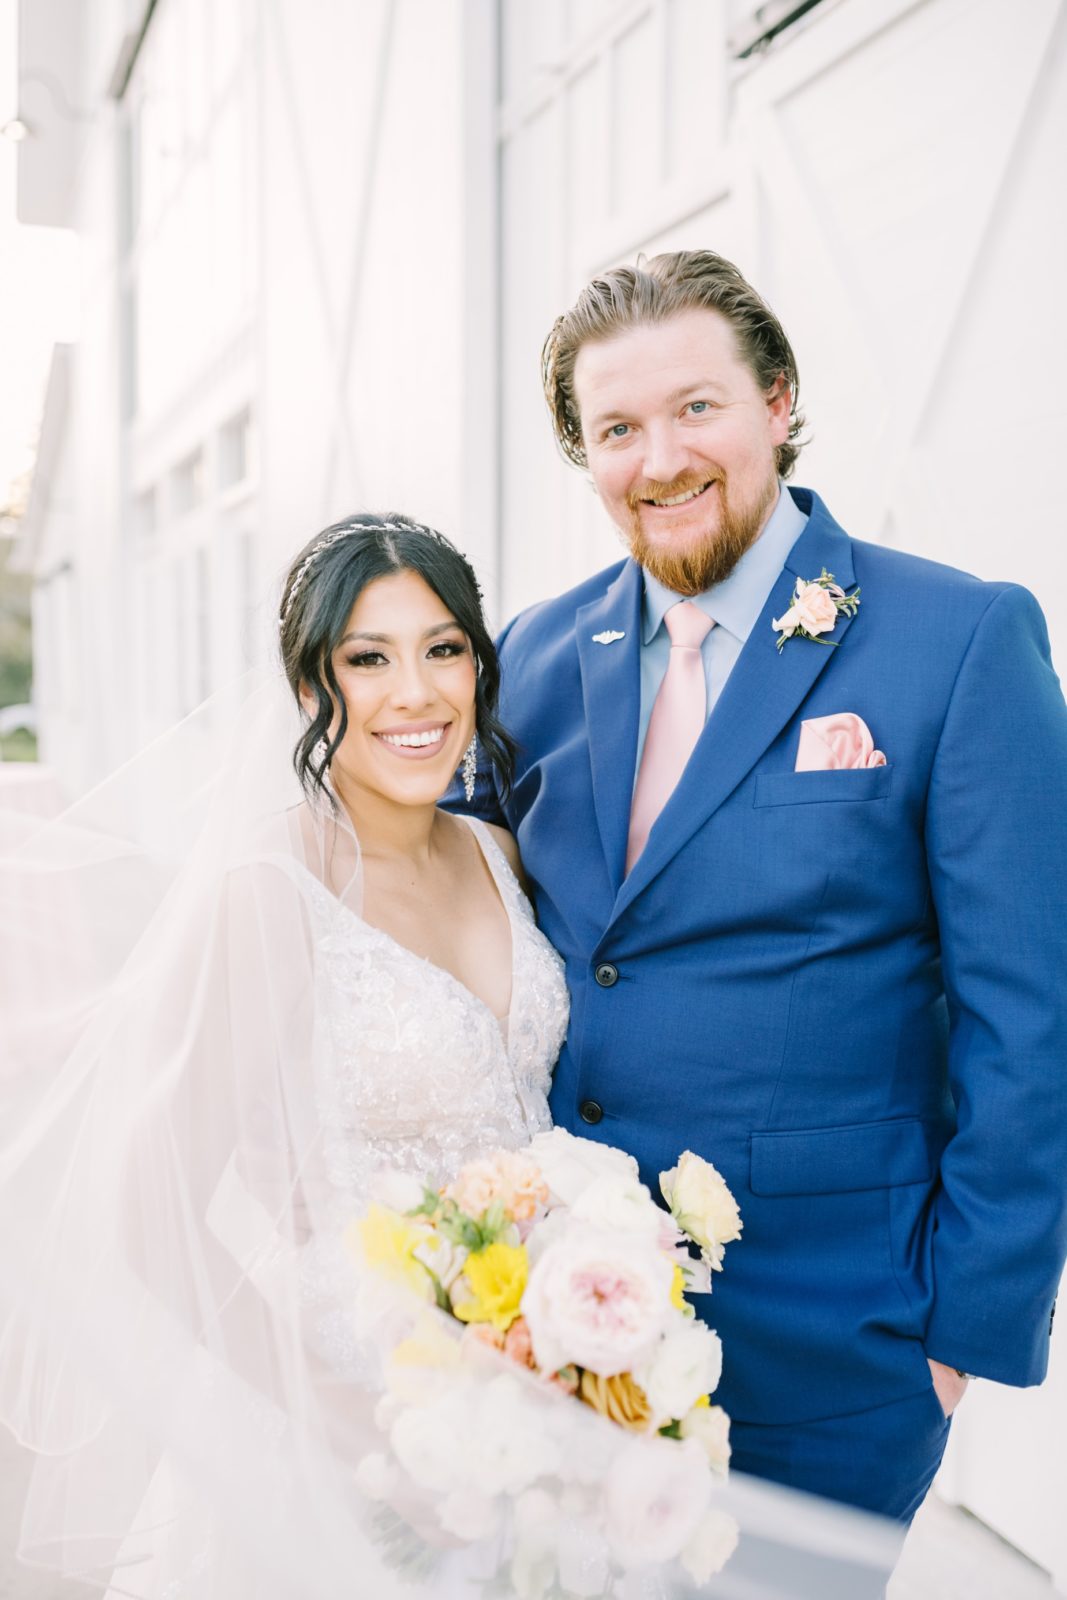 Close-up portrait of the newlyweds with a veil flowing in front by Christina Elliott Photography. veil portrait she said yes just married #ChristinaElliottPhotography #ChristinaElliottWeddings #Houstonwedding #TheSpringsVenue #EastHoustonweddings